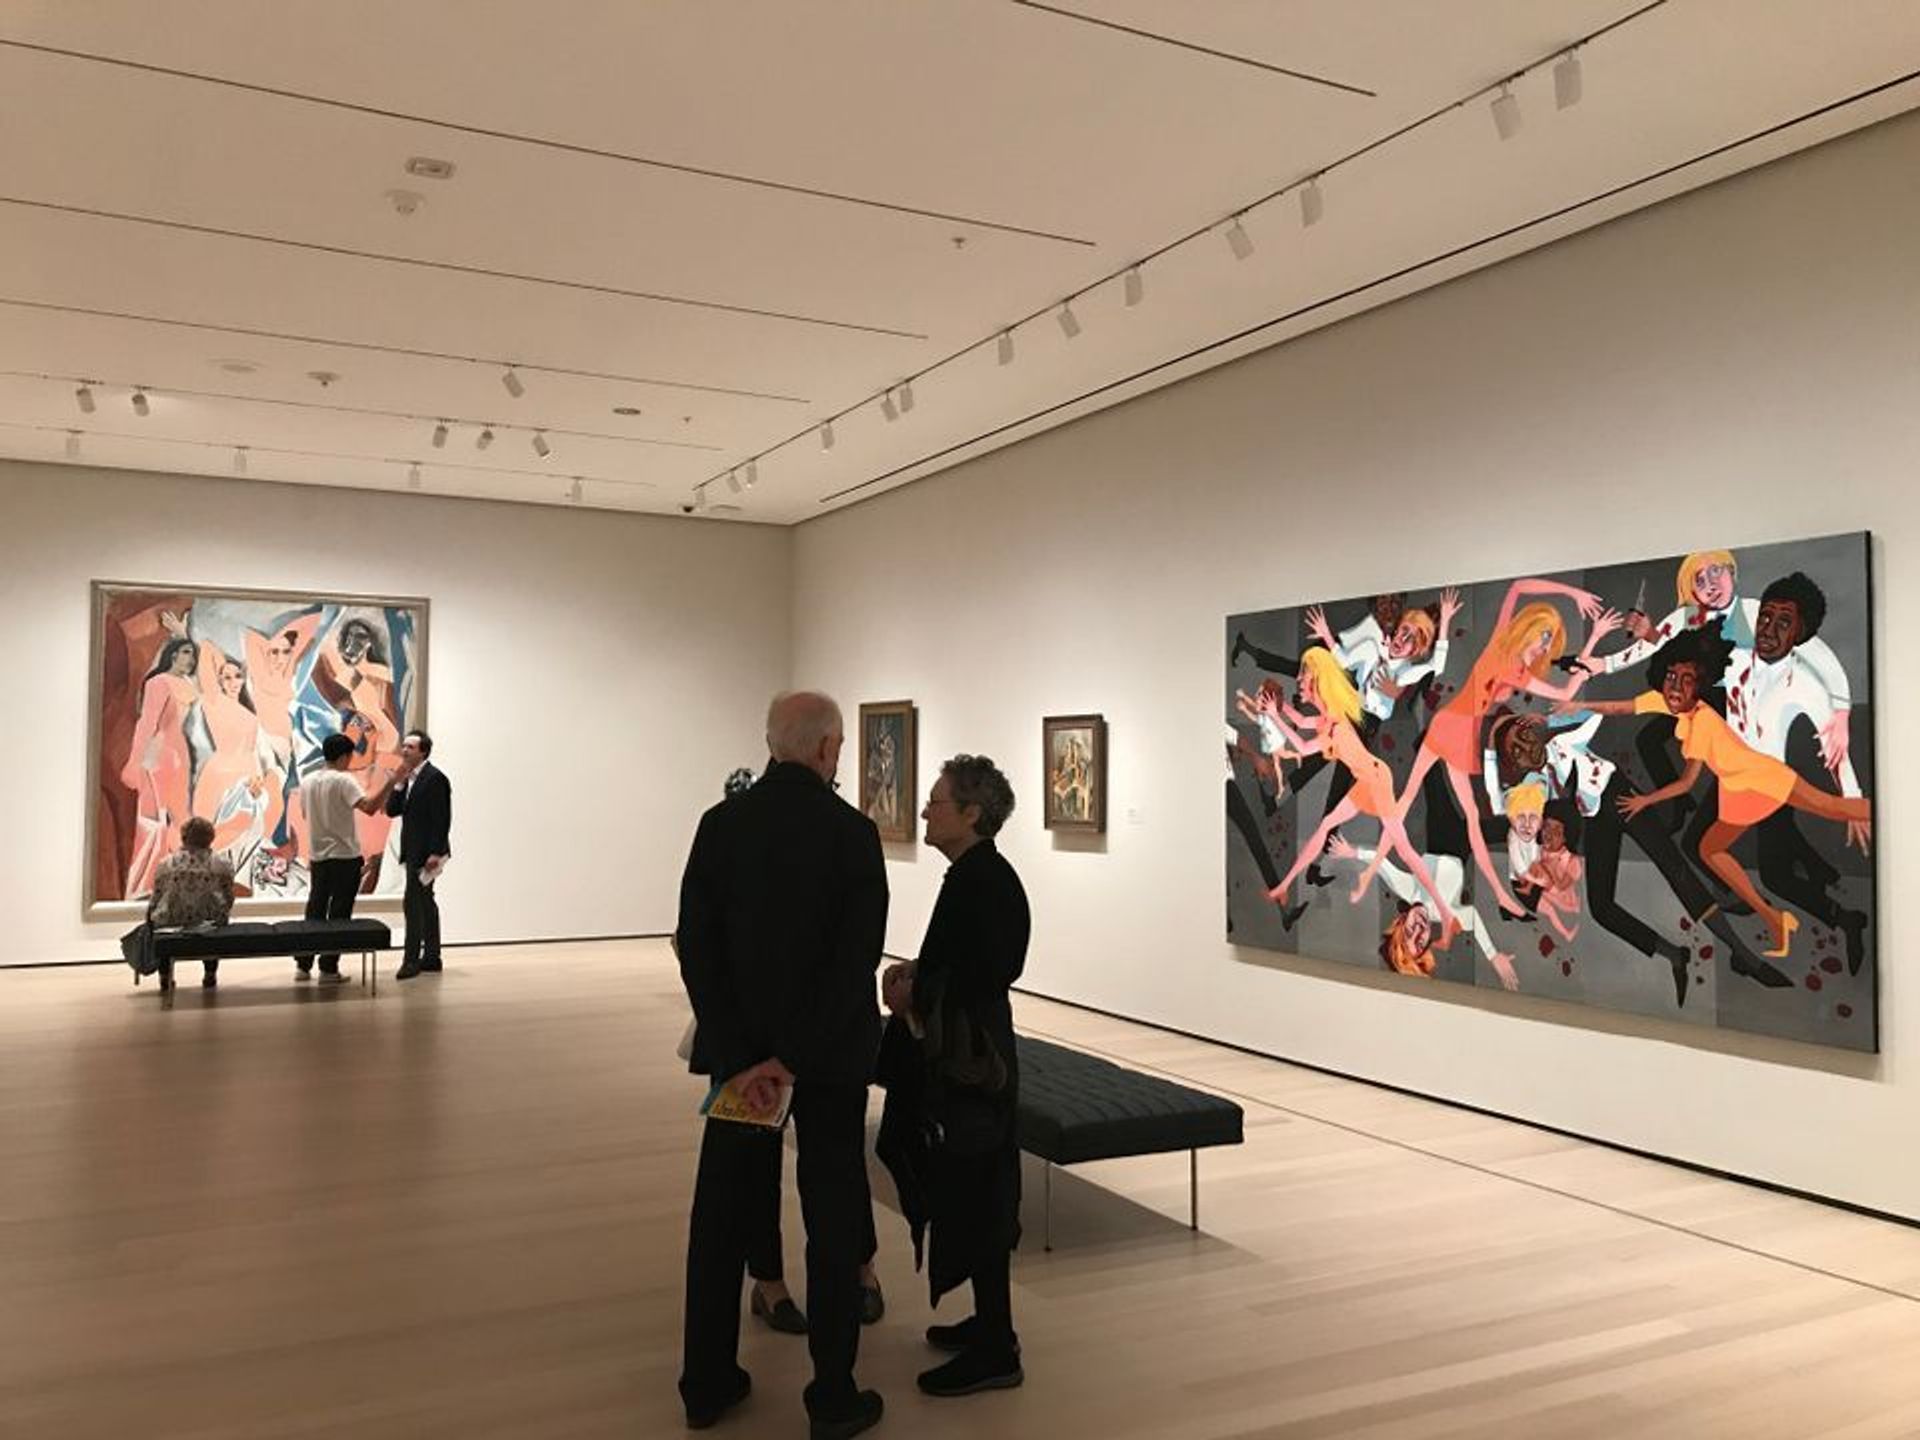 MoMA's fifth-floor gallery around Les Demoiselles d’Avignon juxtaposes Picasso’s groundbreaking 1907 painting with Faith Ringgold’s large-scale painting American People Series #20: Die (1967), which was inspired by another Picasso work, Guernica (1937) © Photo: Helen Stoilas, The Art Newspaper